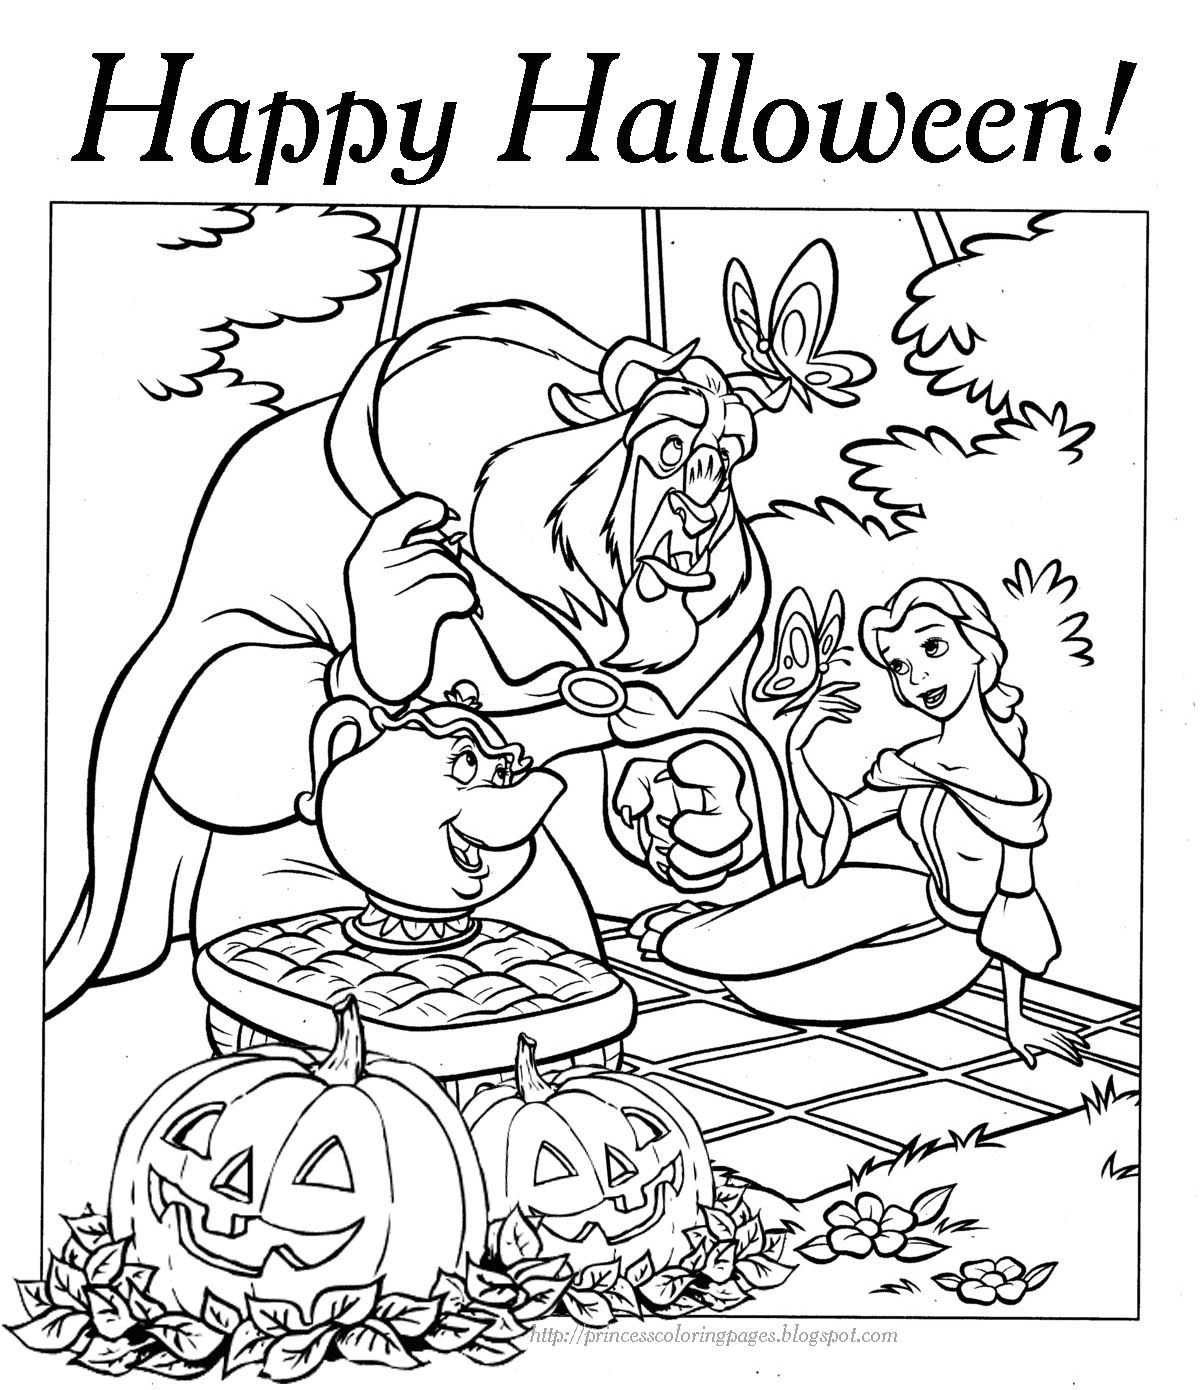  Disney Halloween Coloring Pages Hard - Free Disney